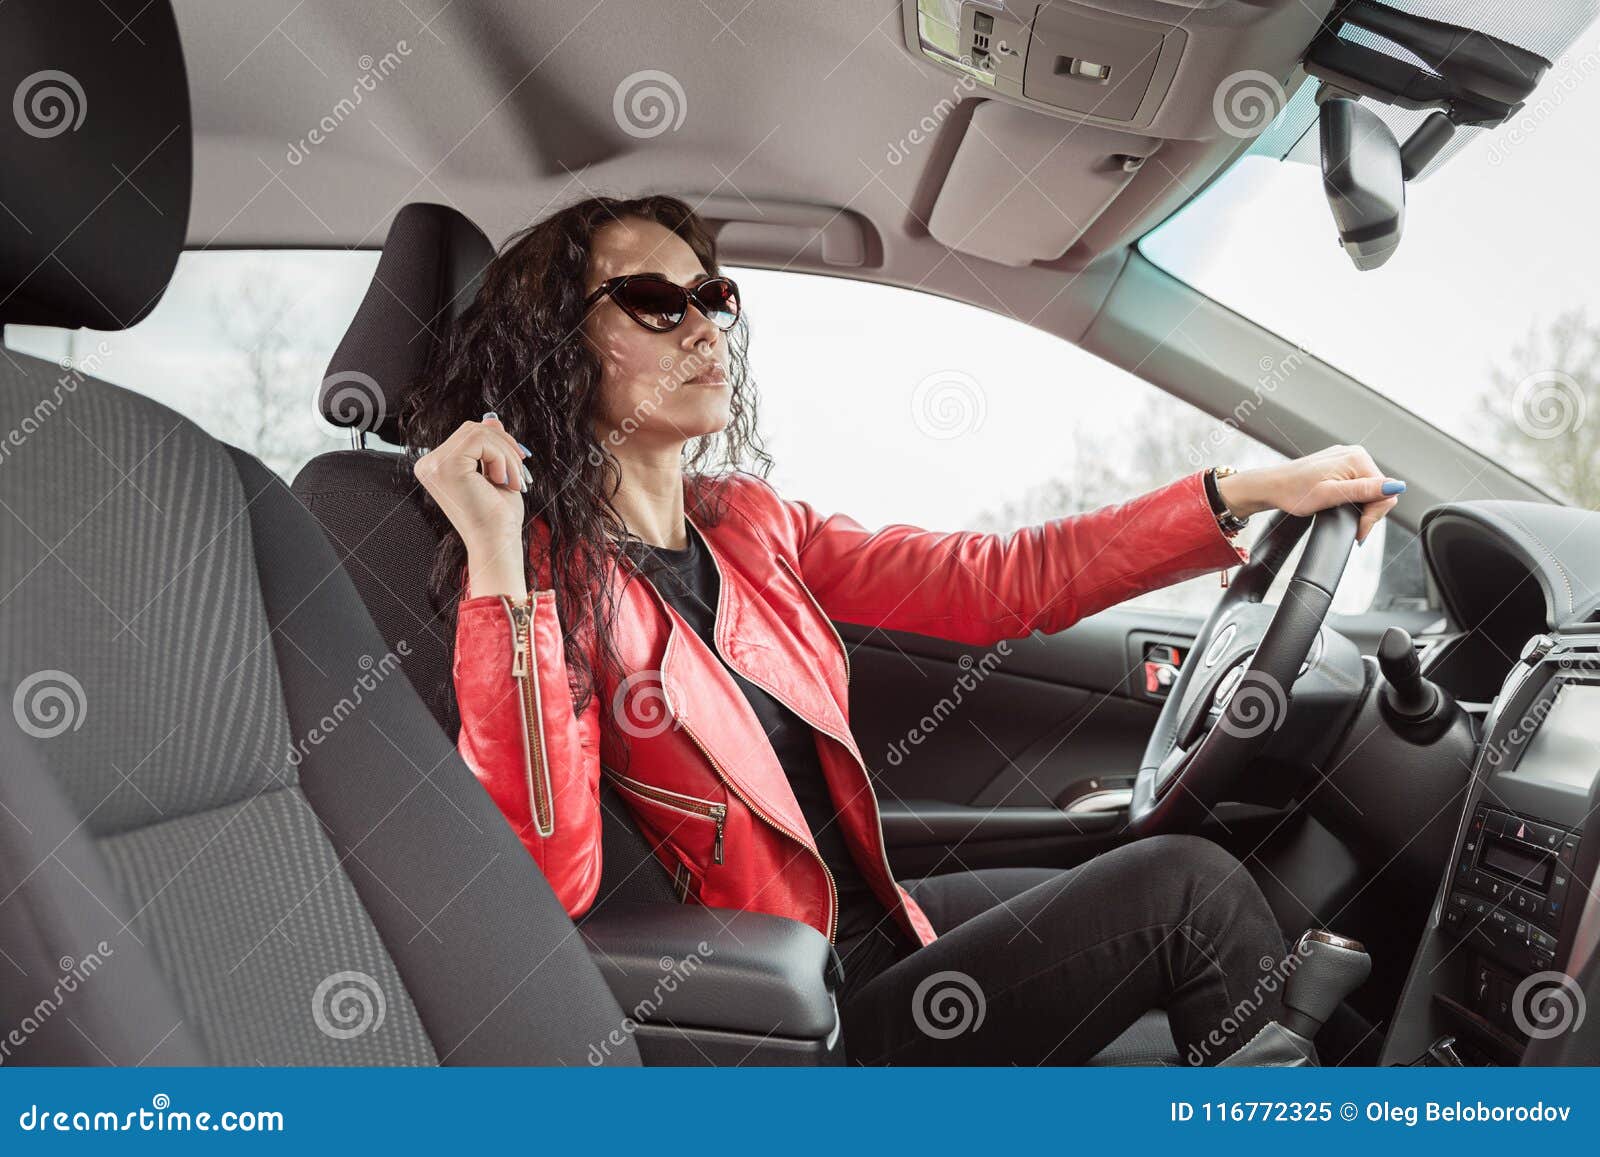 Reklame At interagere Motivere Lady in Red Leather Jacket Inside Car Behind Wheel. Stock Image - Image of  style, happy: 116772325